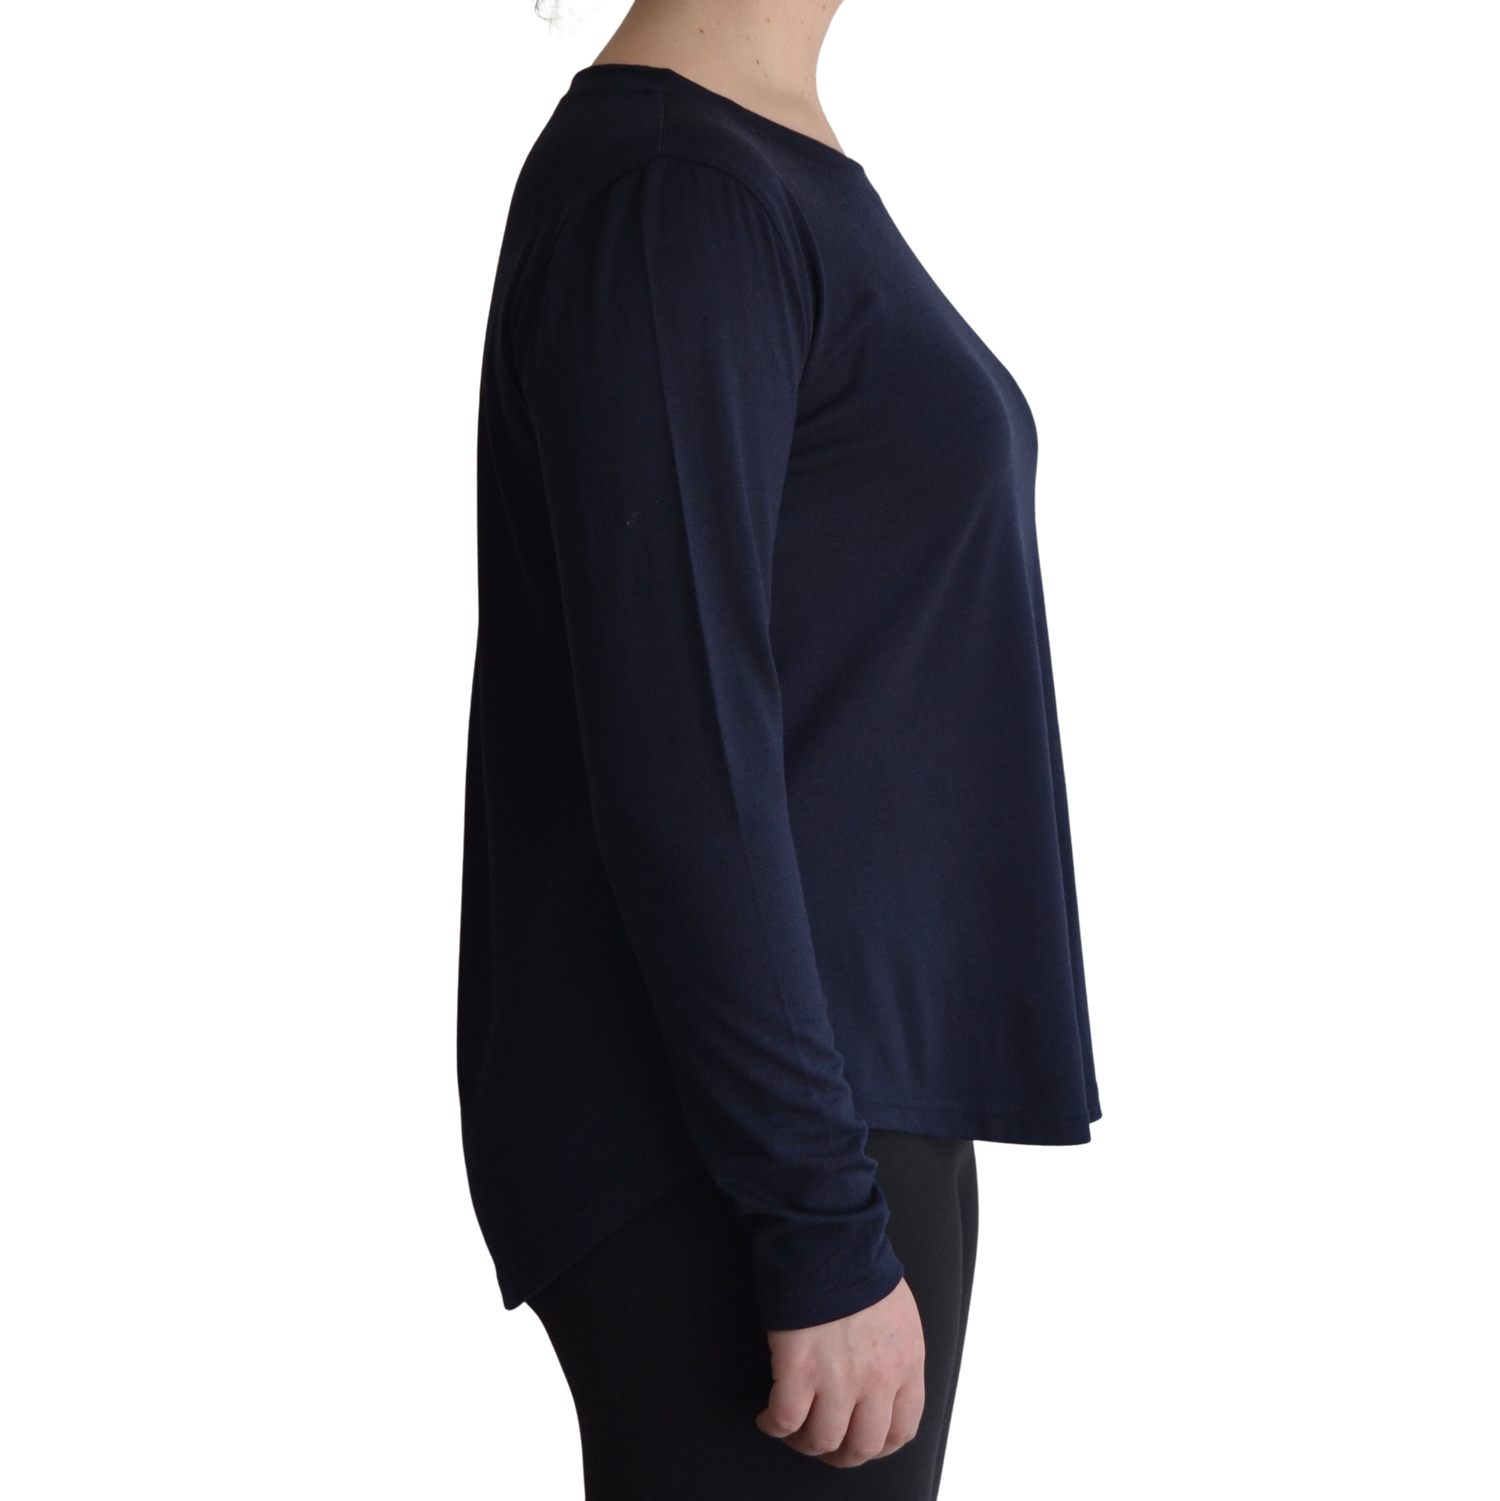 Links long sleeve merino top in navy blue colour, model is standing in profile showing the side view of the shirt with a scooped hemline that drops lower at the back. 